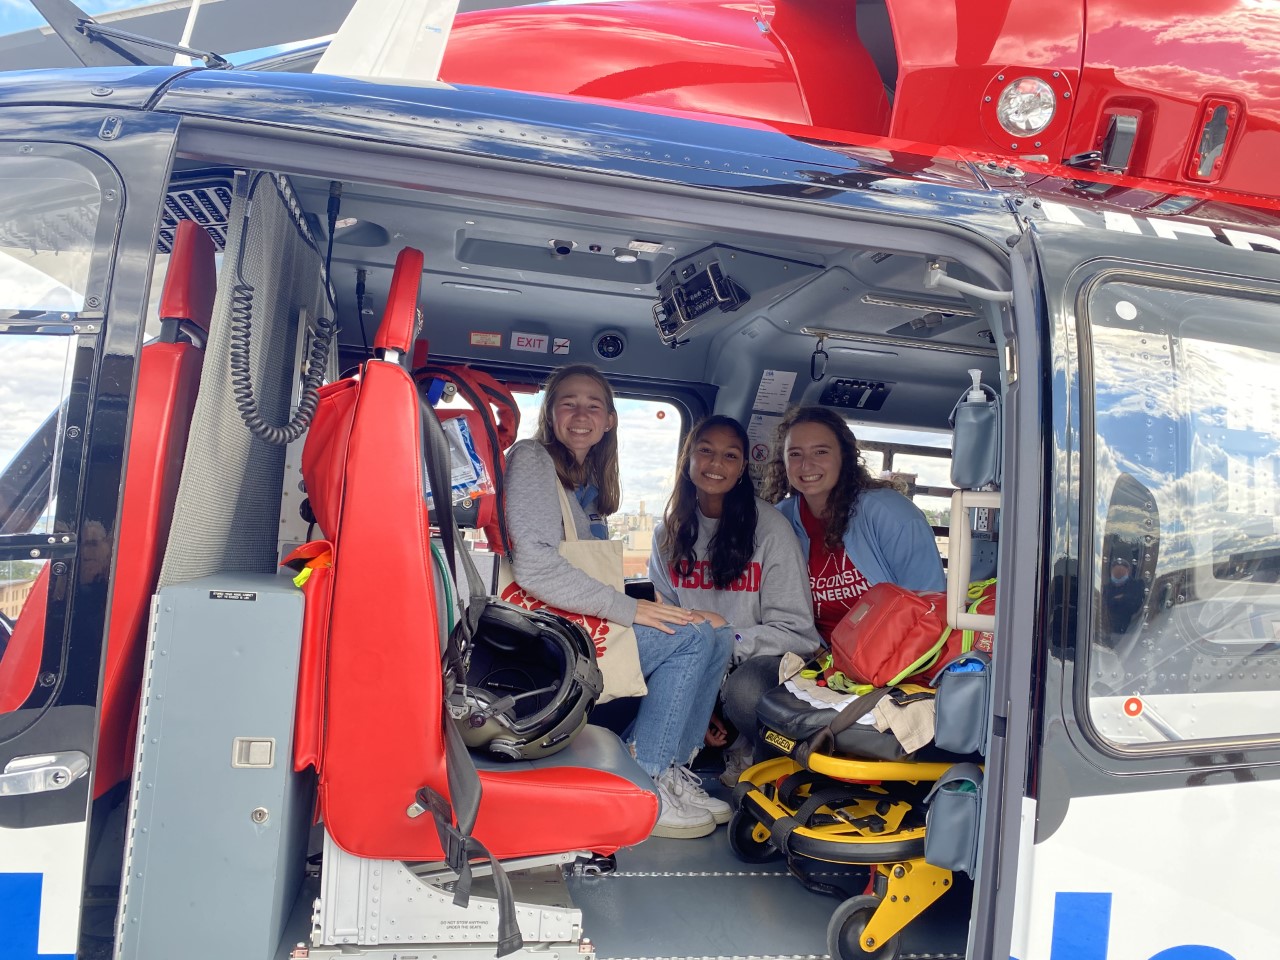 Visit to UW Health- Greta, Neha, and Julia in the helicopter